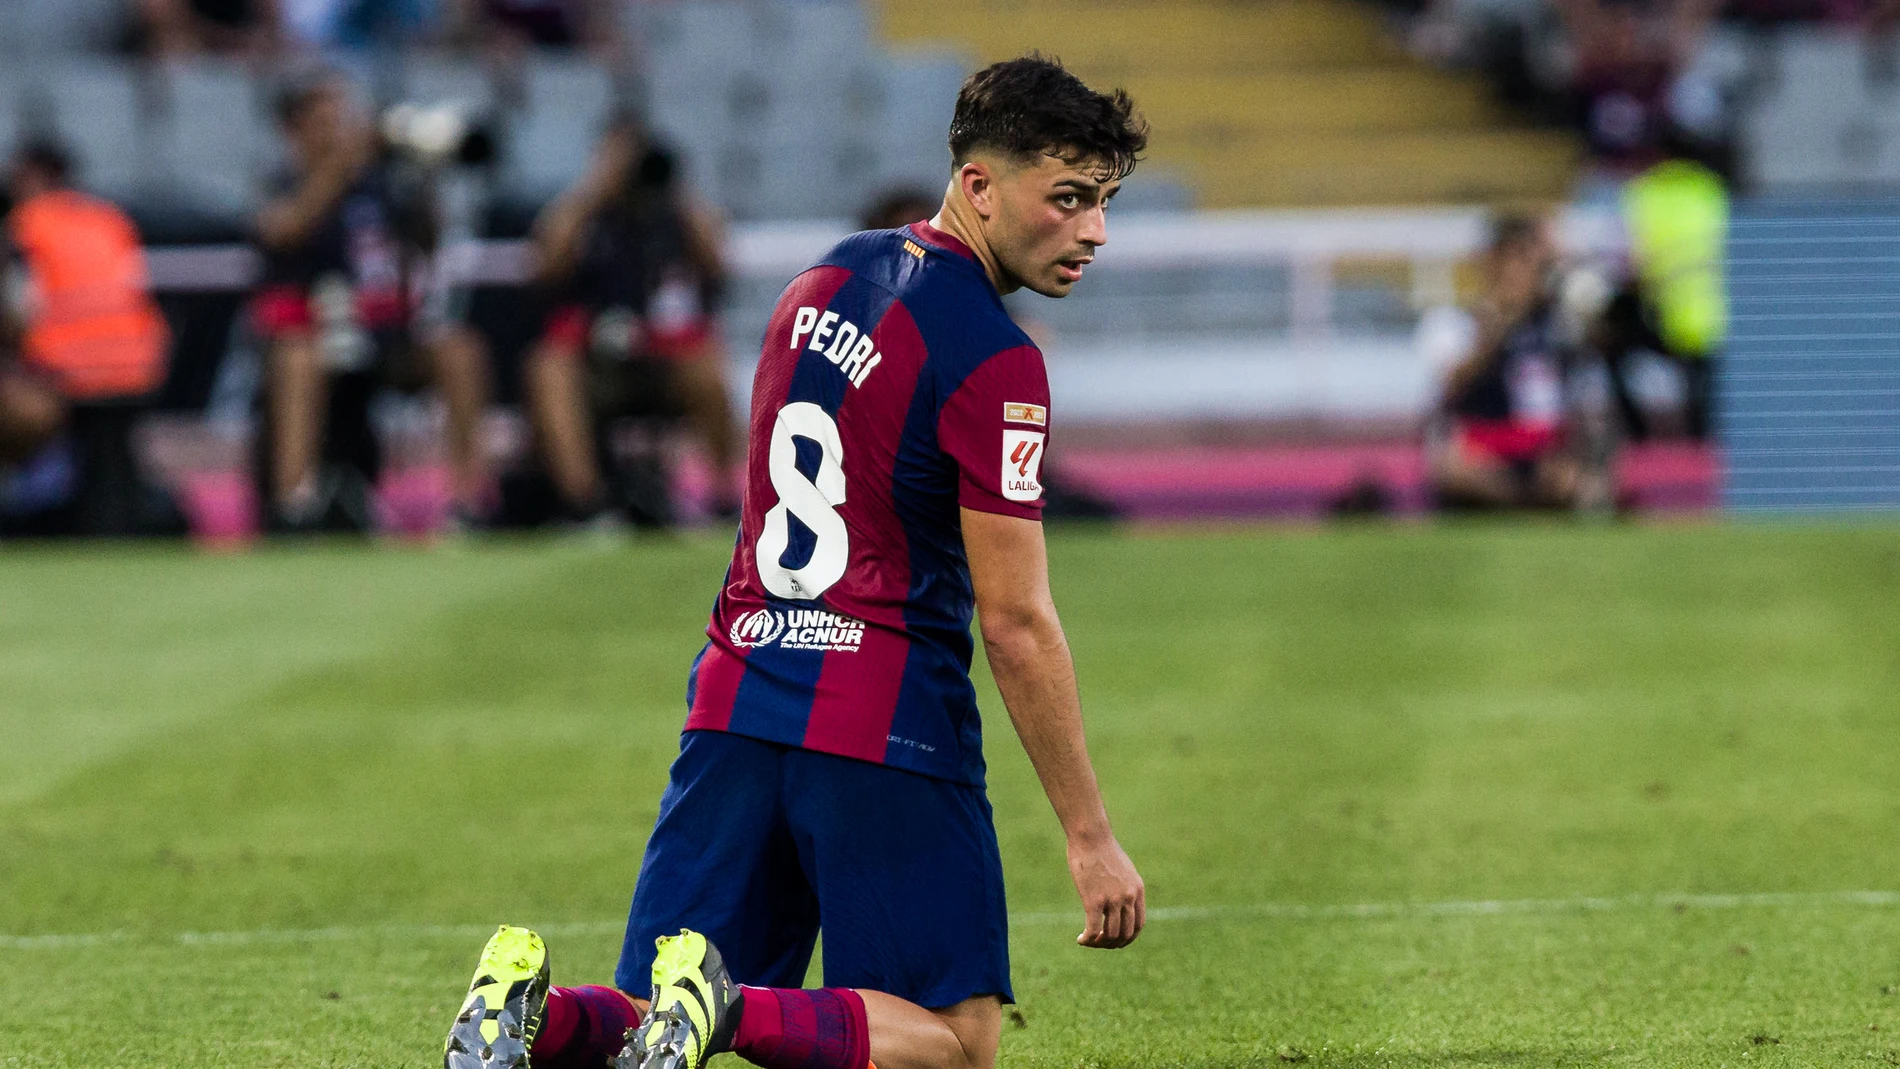 Pedri Gonzalez of Fc Barcelona in action during the Spanish league, La Liga EA Sports, football match played between FC Barcelona and Cadiz CF at Estadi Olimpic Lluis Company on August 20, 2023 in Barcelona, Spain. Javier Borrego / Afp7 20/08/2023 ONLY FOR USE IN SPAIN